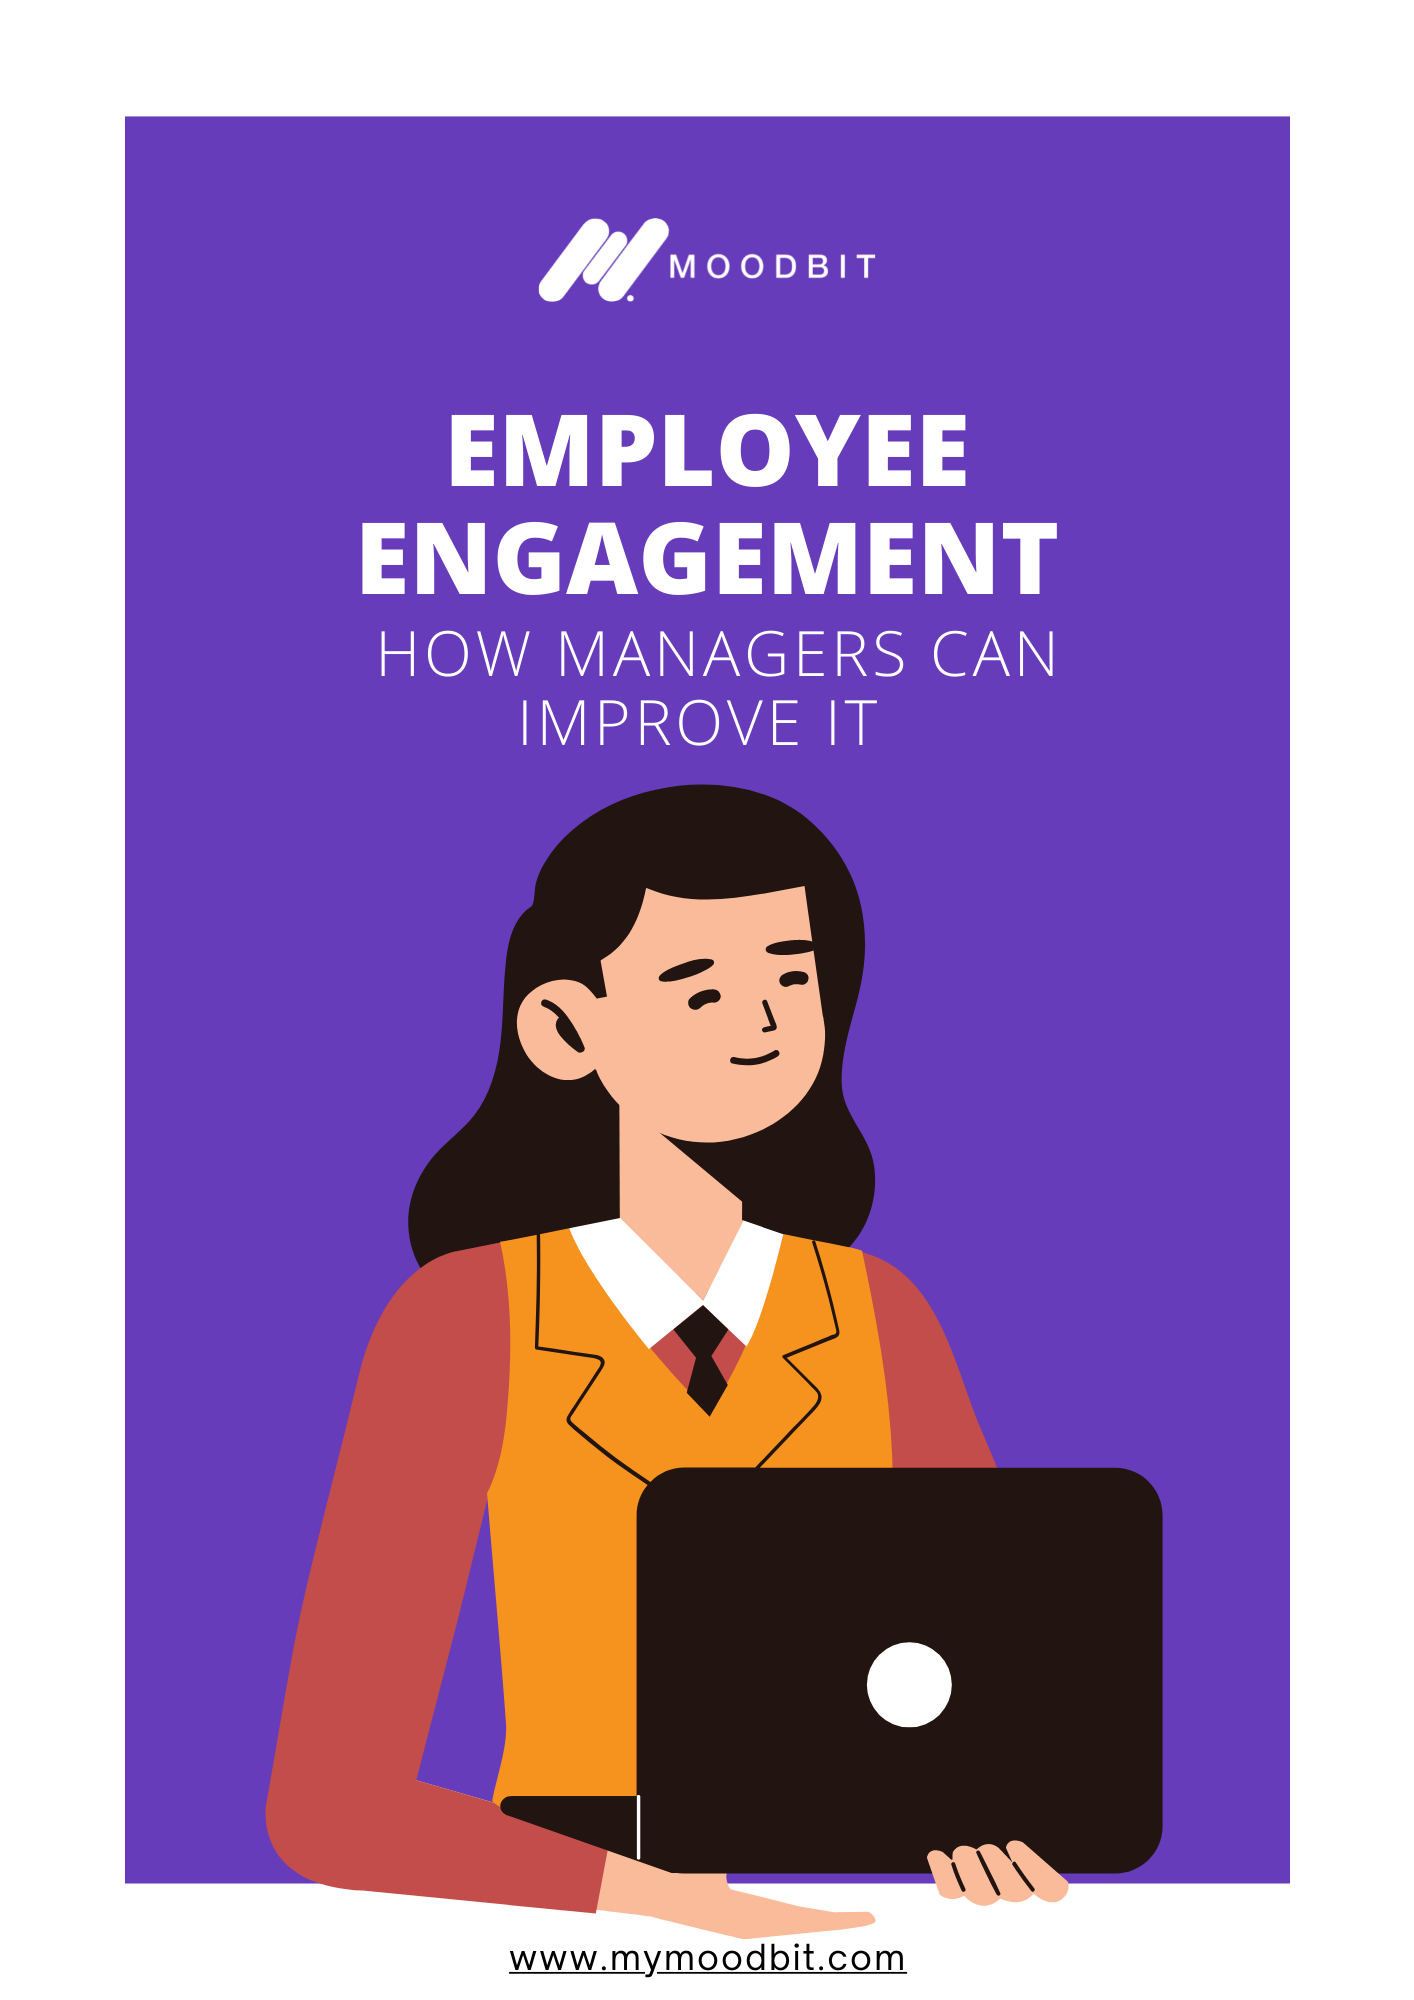 Copia de BOOK Employee Engagement - How Managers Can Improve It 